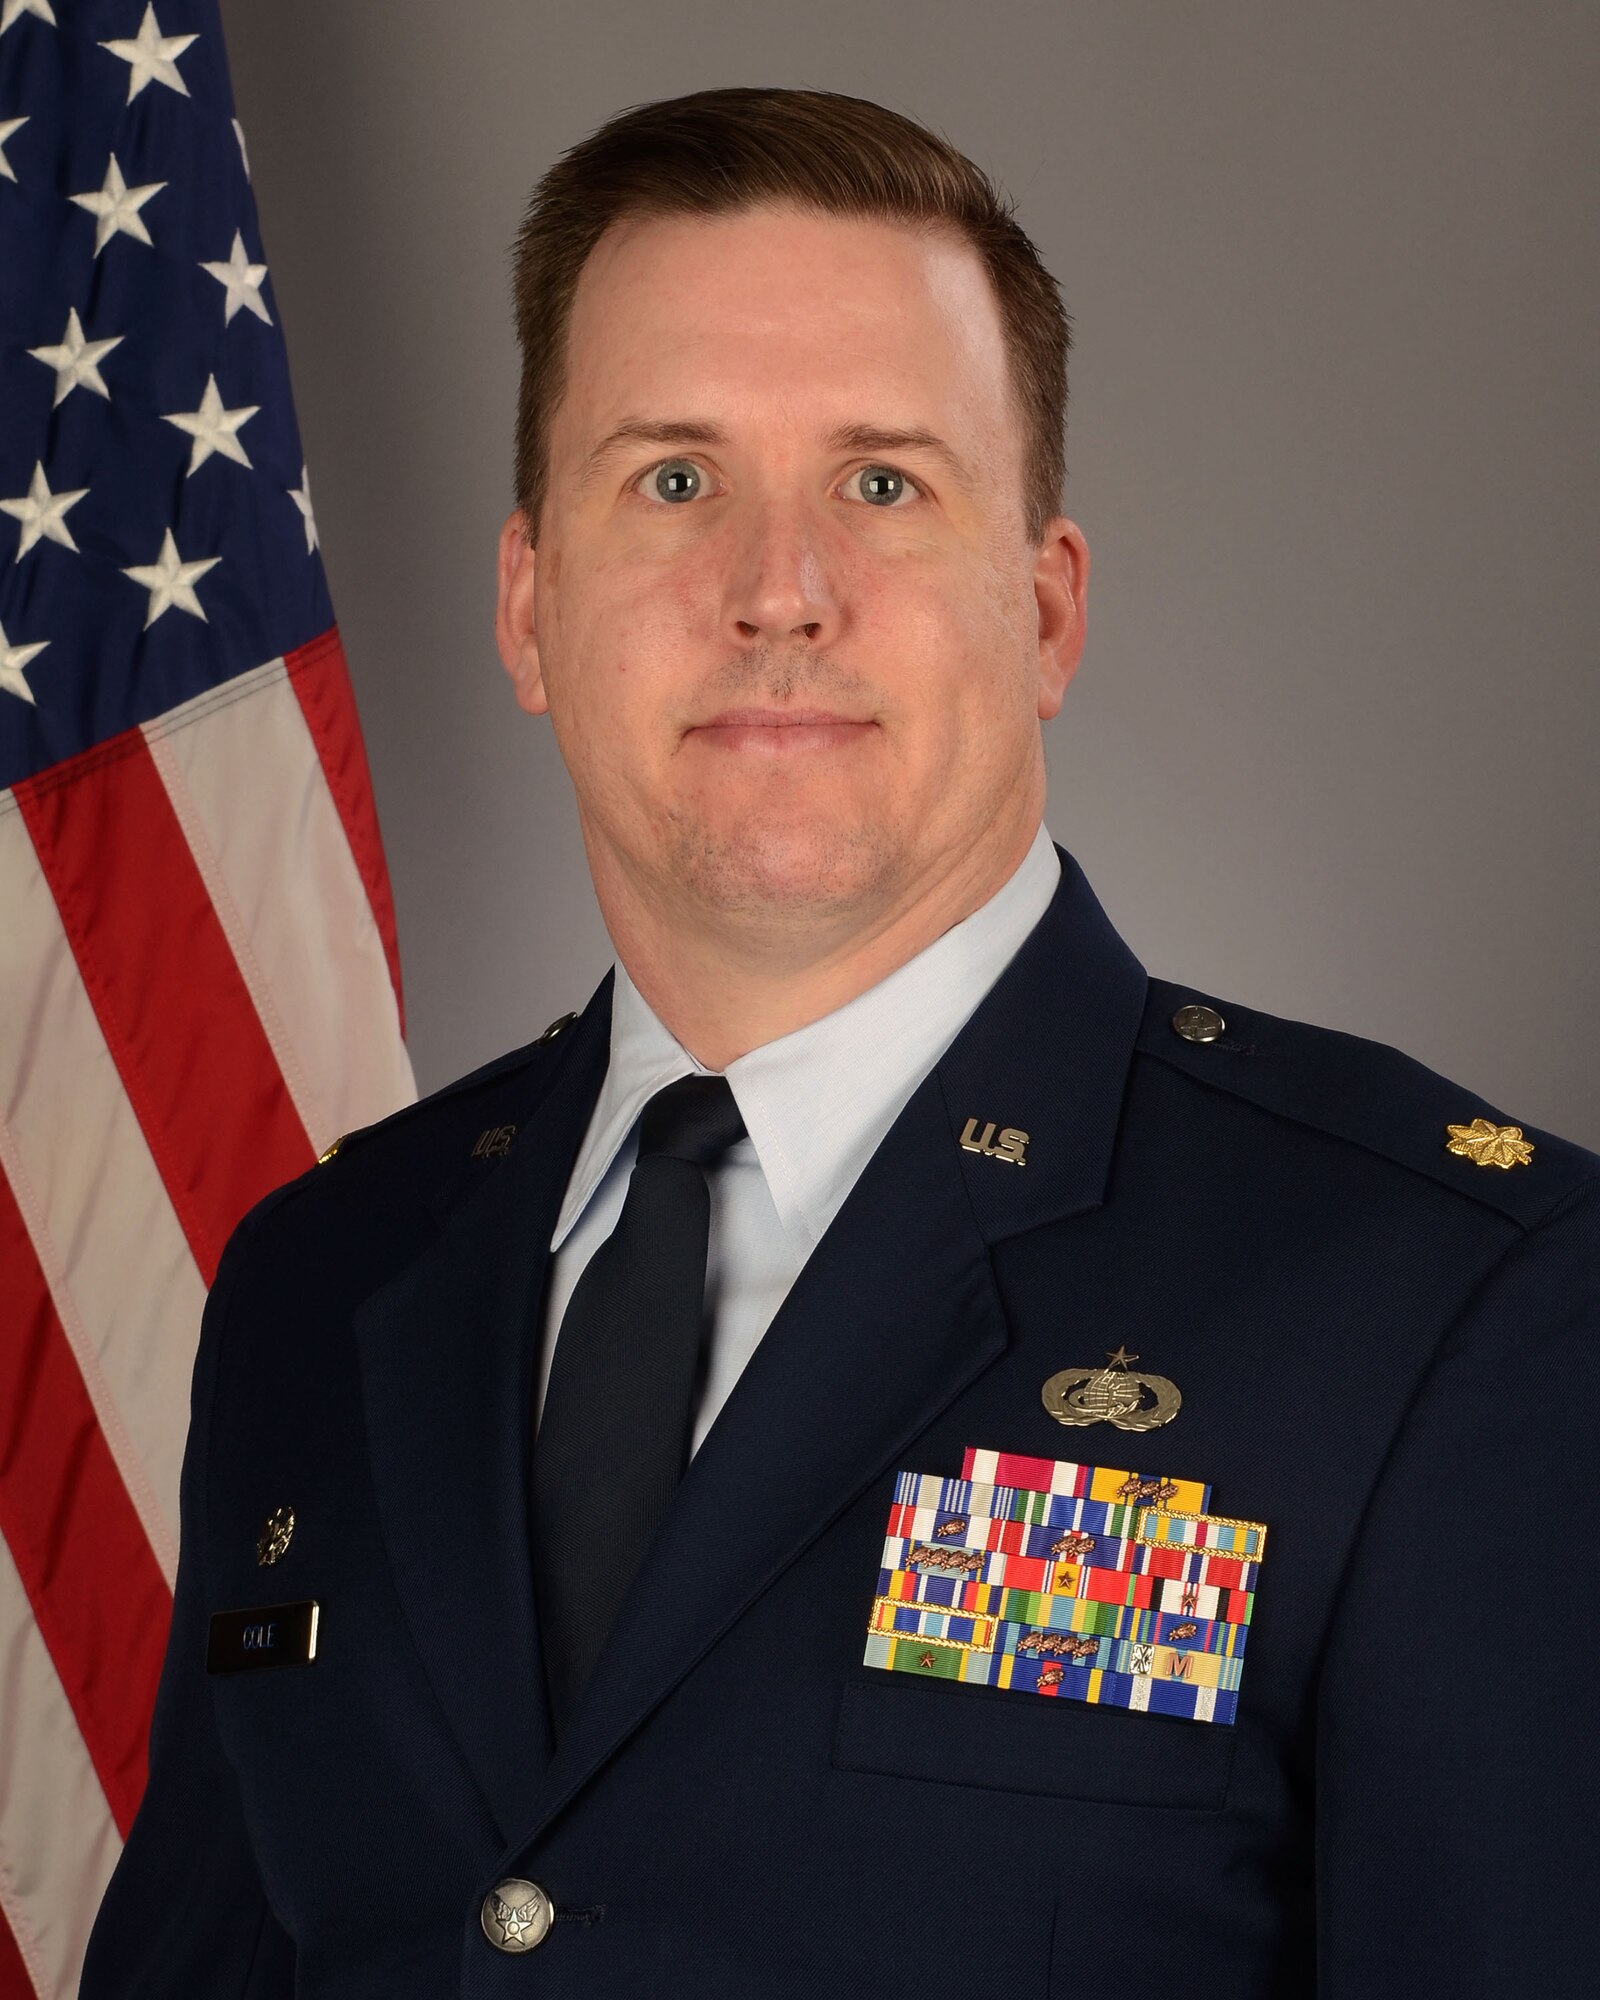 Portrait of U.S. Air Force Maj. Ralph Cole, the 169th Force Support Squadron commander at McEntire Joint National Guard Base, S.C., January 24, 2018.  (U.S. Air National Guard photo by Senior Master Sgt. Edward Snyder)